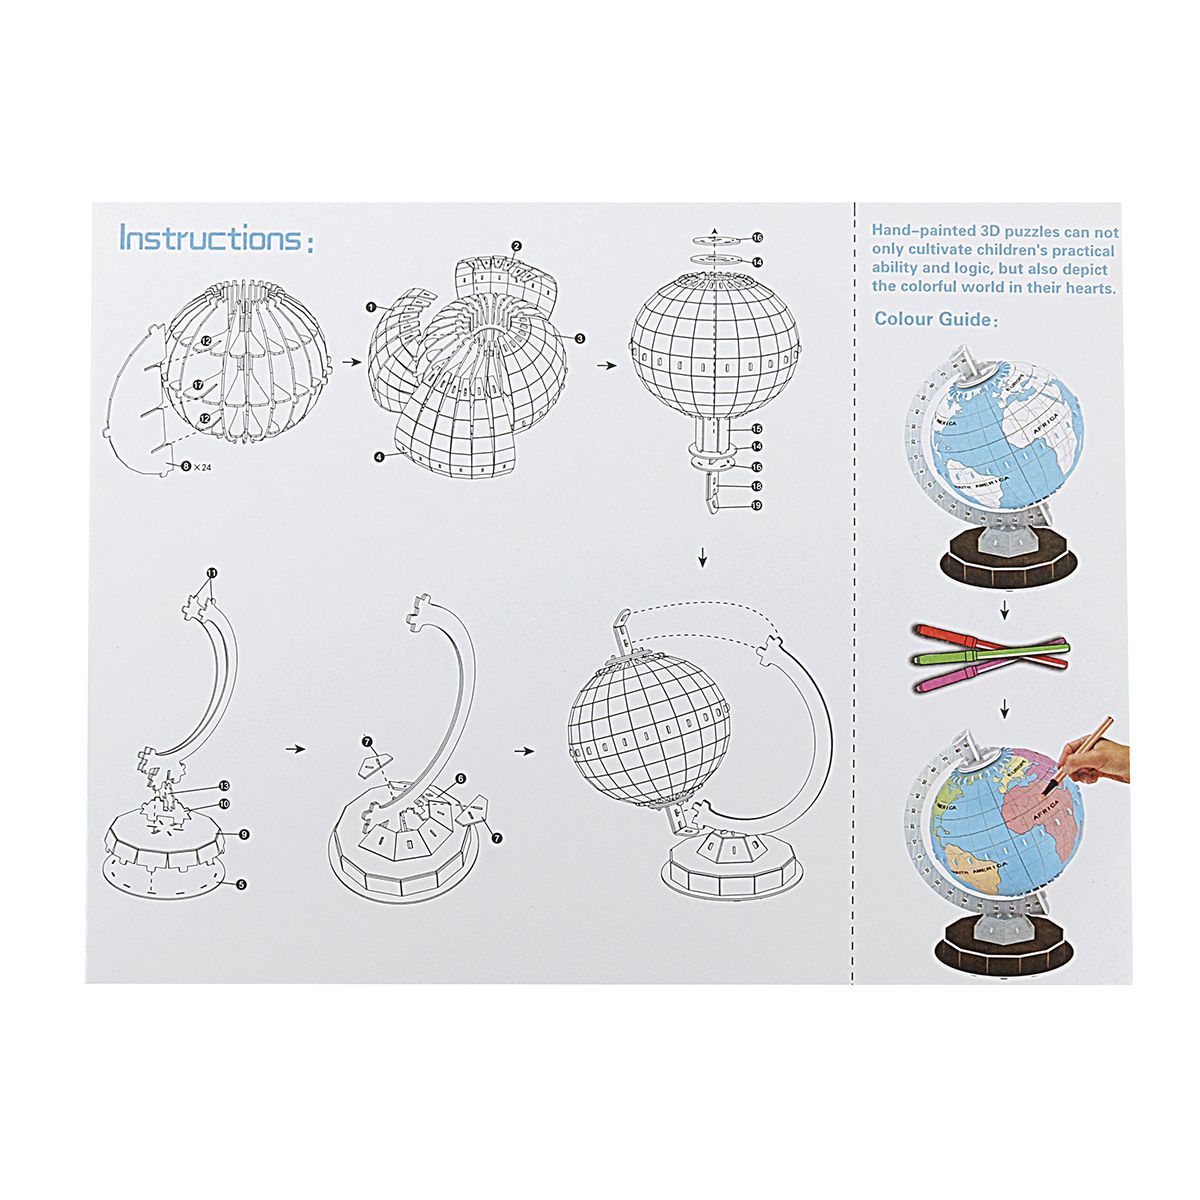 DIY-3D-Puzzle-Globe-Model-Painting-Puzzles-Tellurion-Color-Matching-Earth-Models-Continents-Learning-1479321